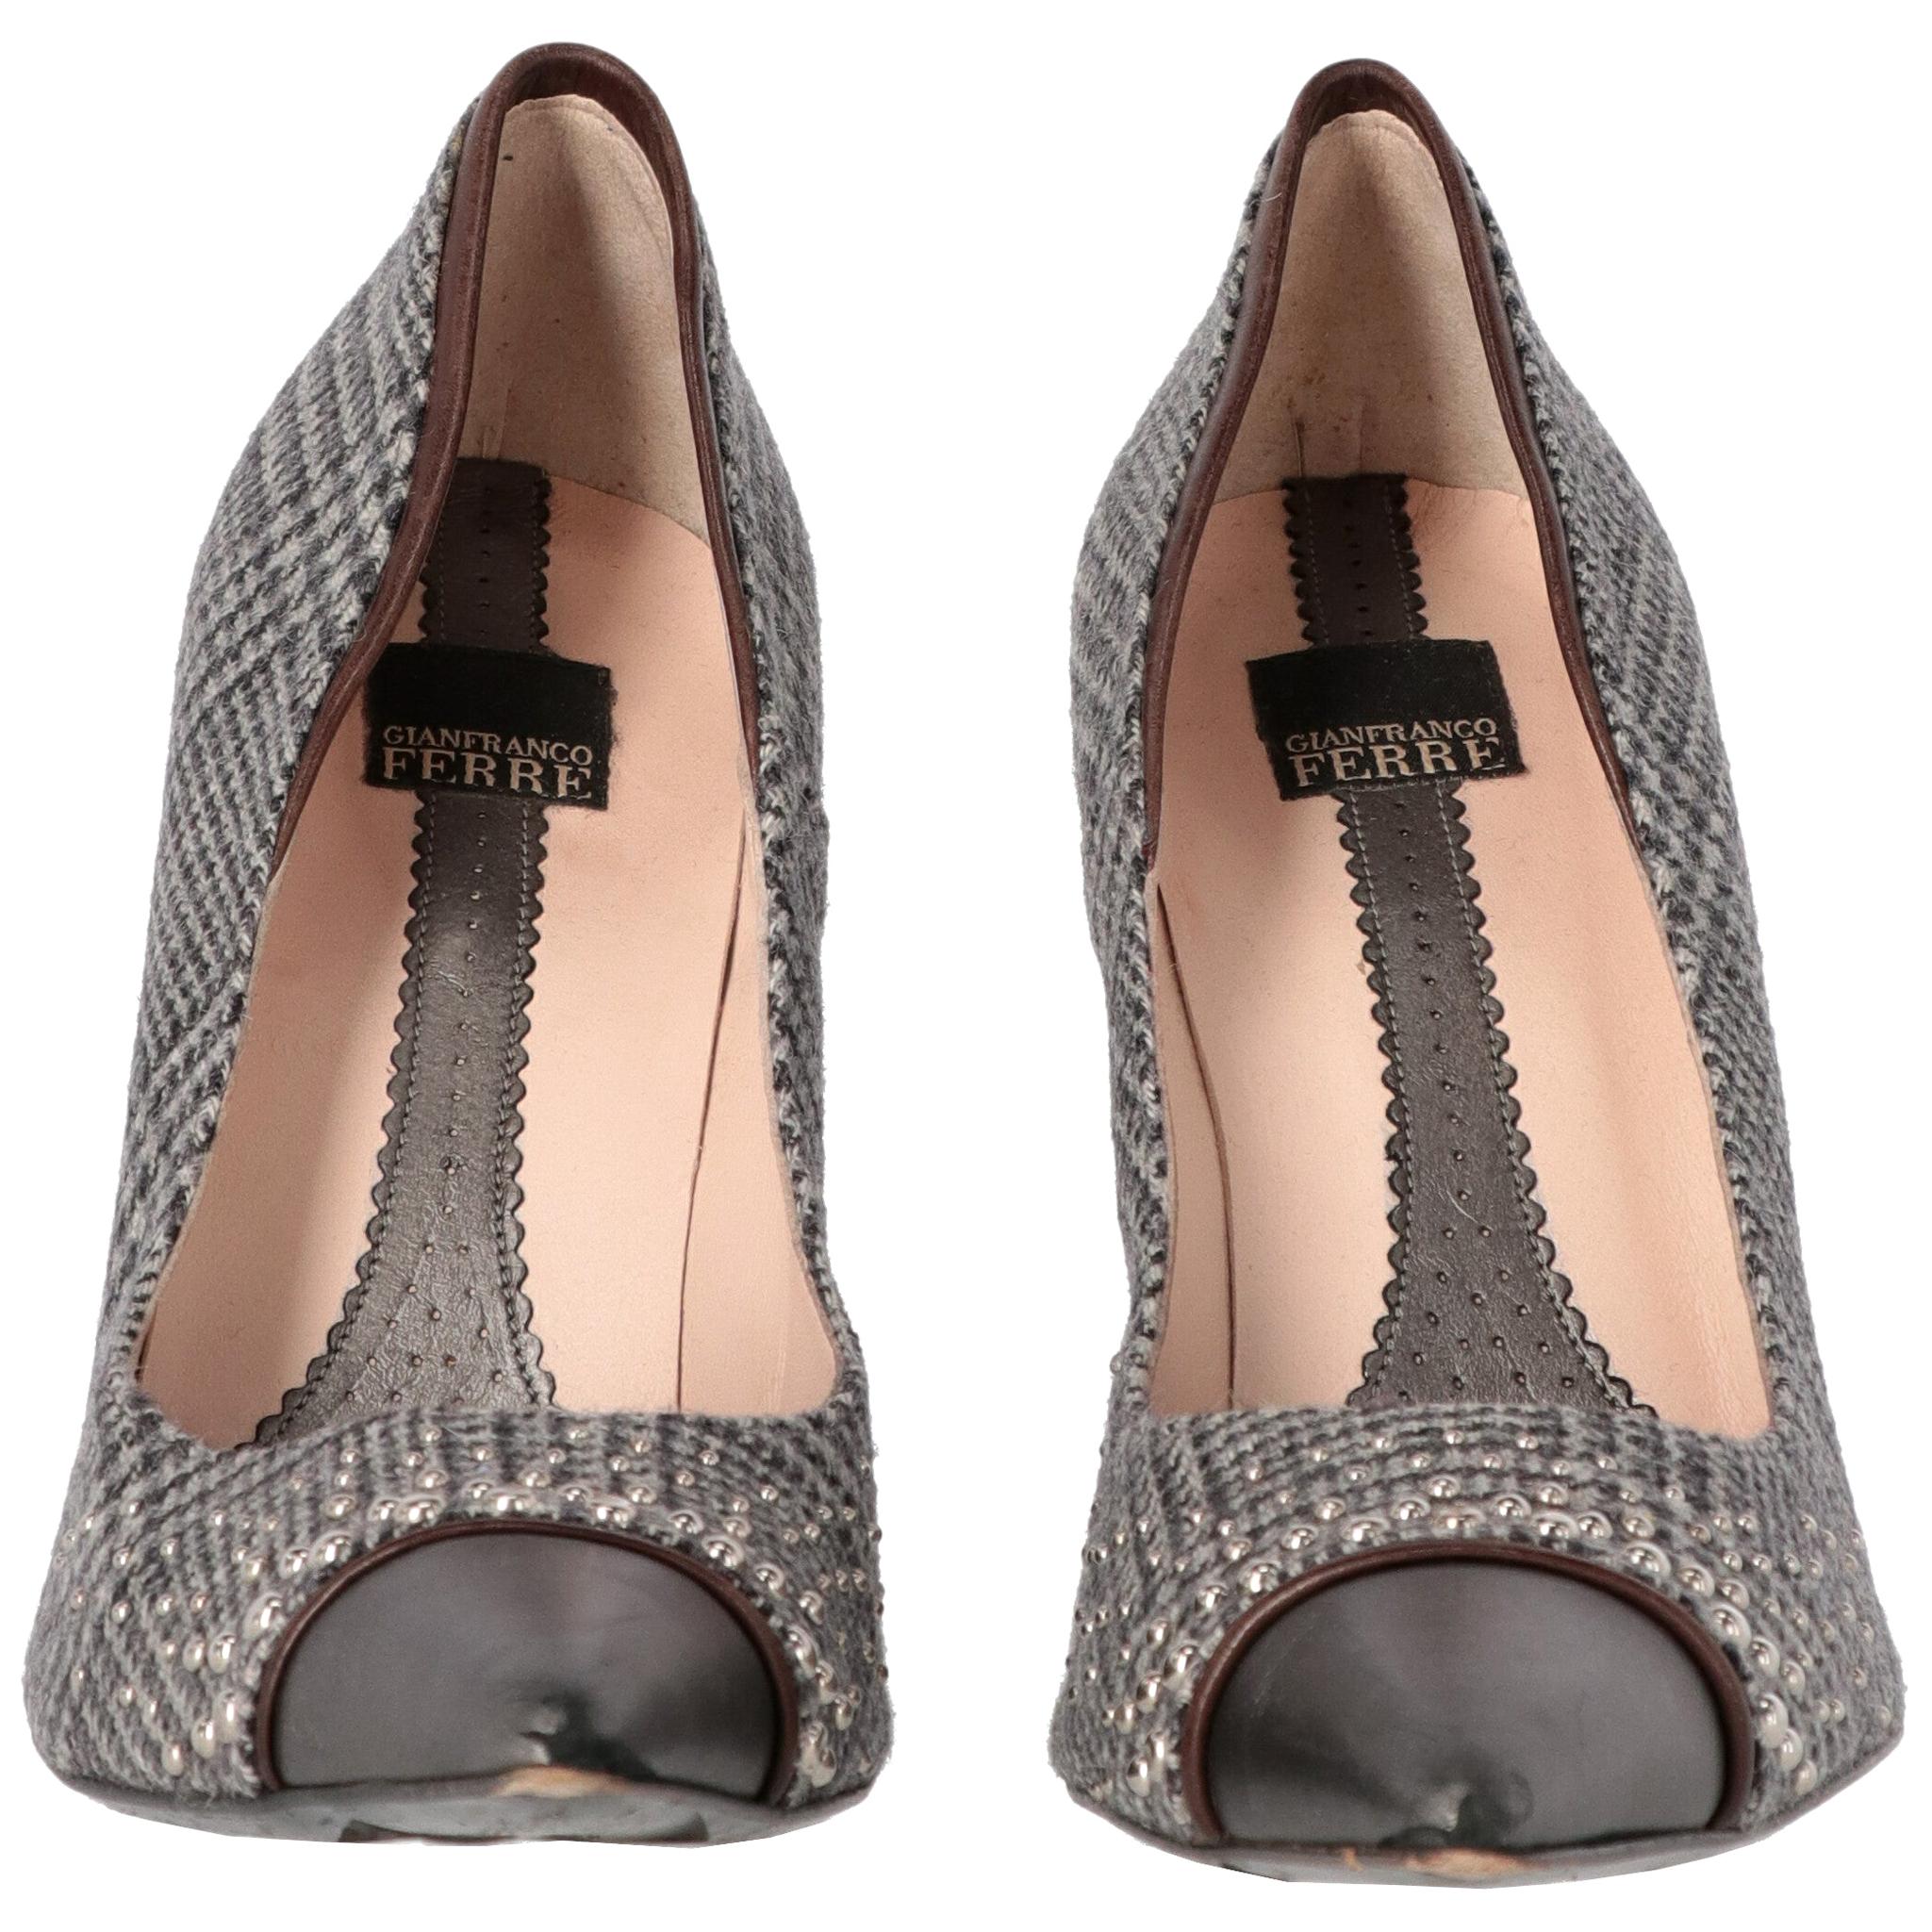 Gianfranco Ferré Prince of Wales grey wool pumps. Contrasting metallic grey leather toe cap with brown hem. Decorated with shiny silver-tone metal semispherical studs of different sizes. Pointed toe and thin heel.

The shoes show some light signs of